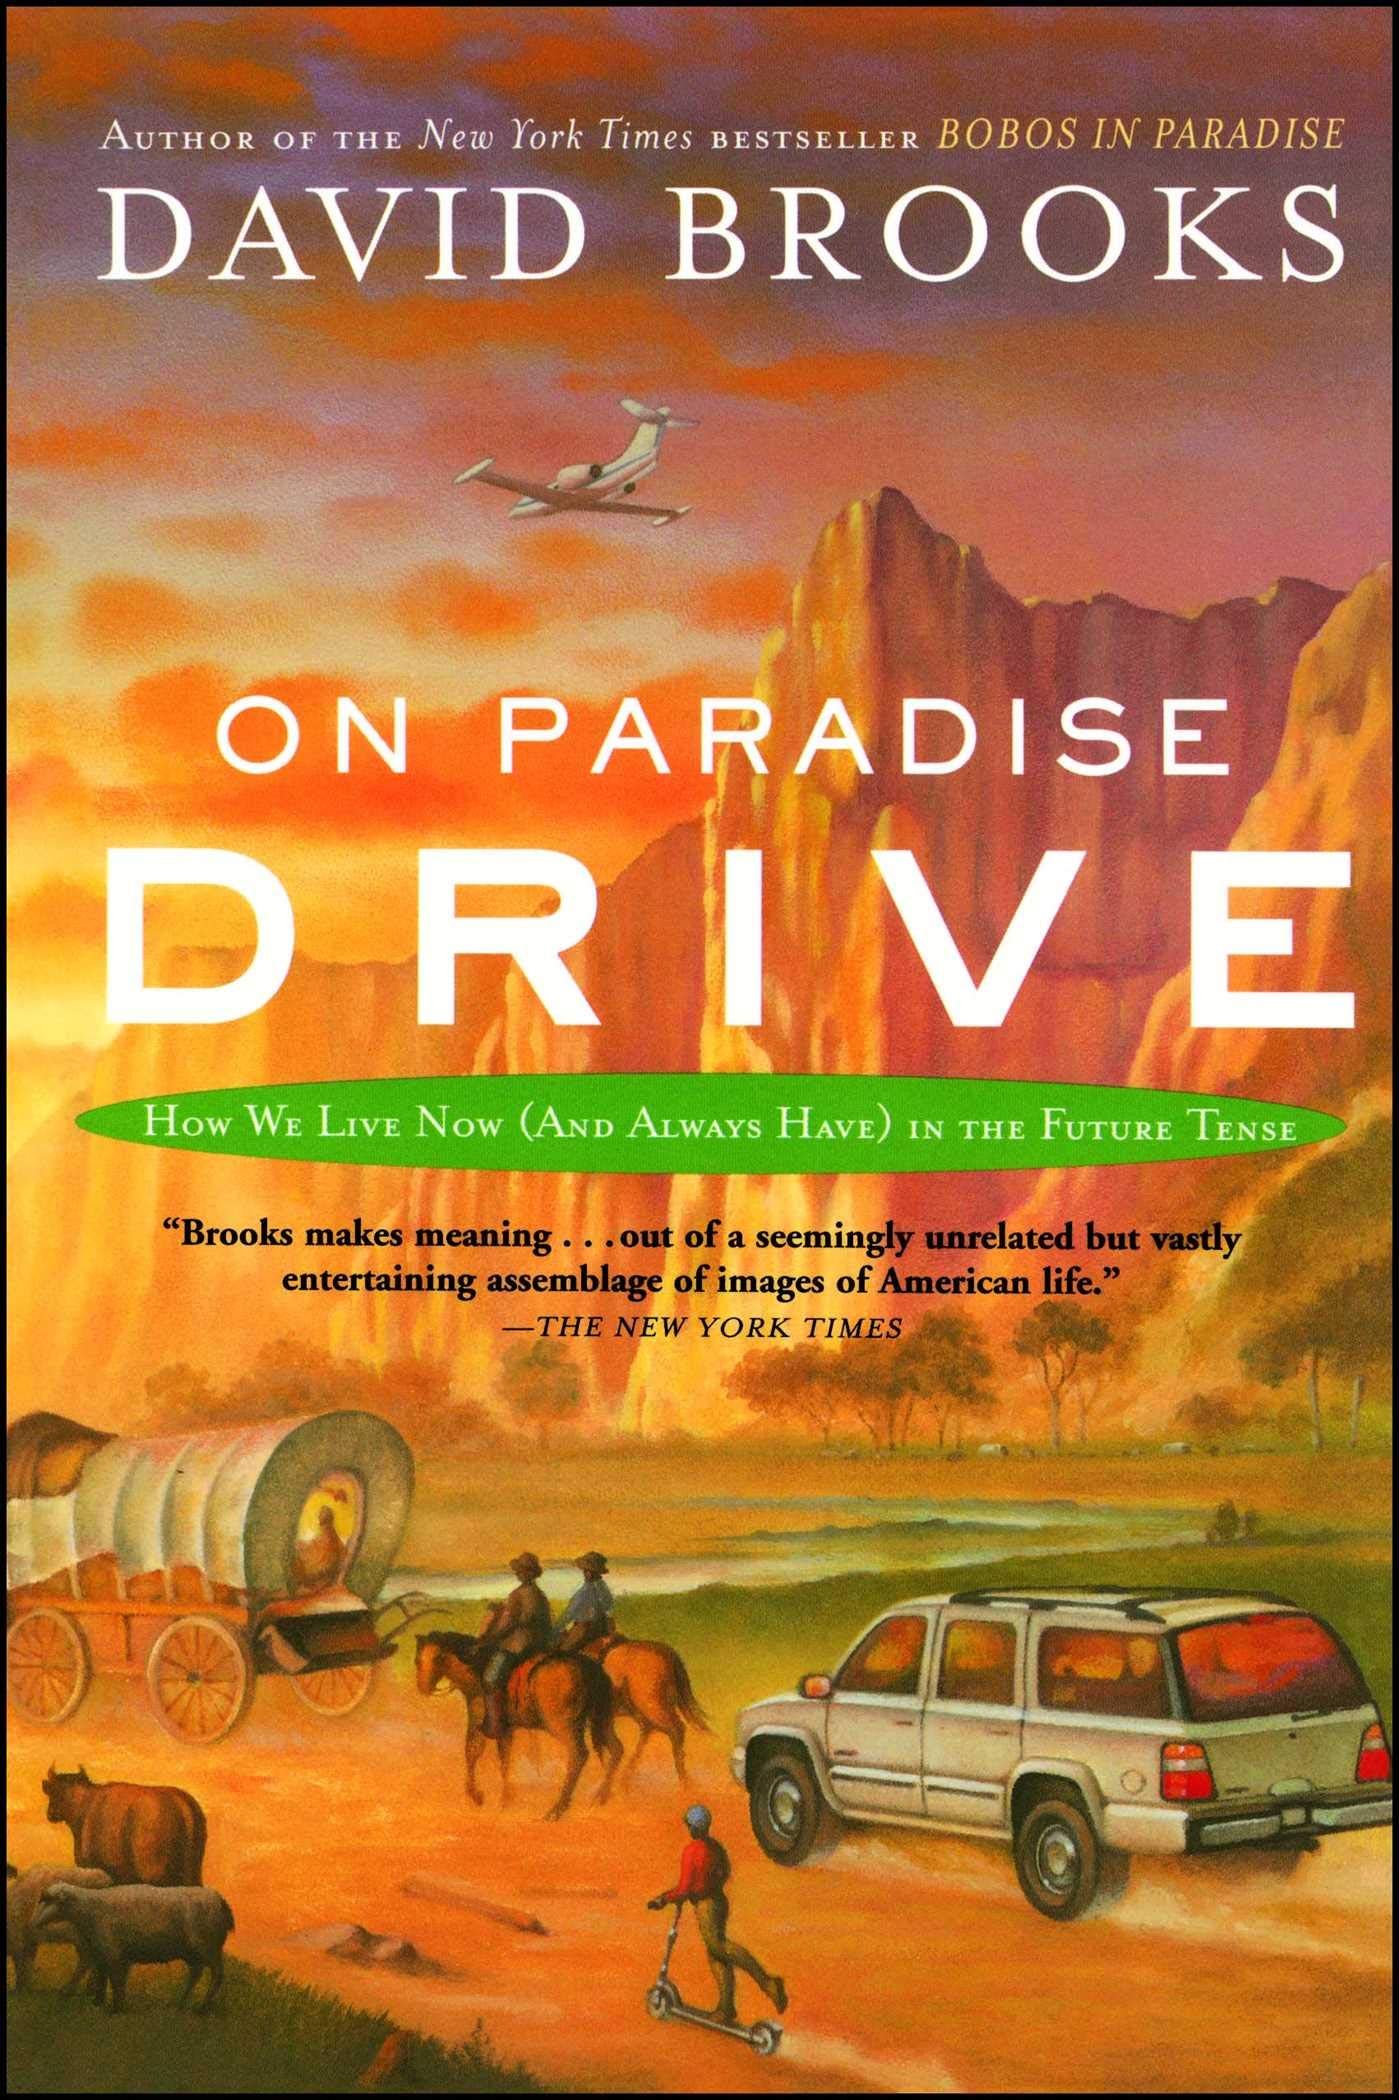 On Paradise Drive: How We Live Now in the Future Tense